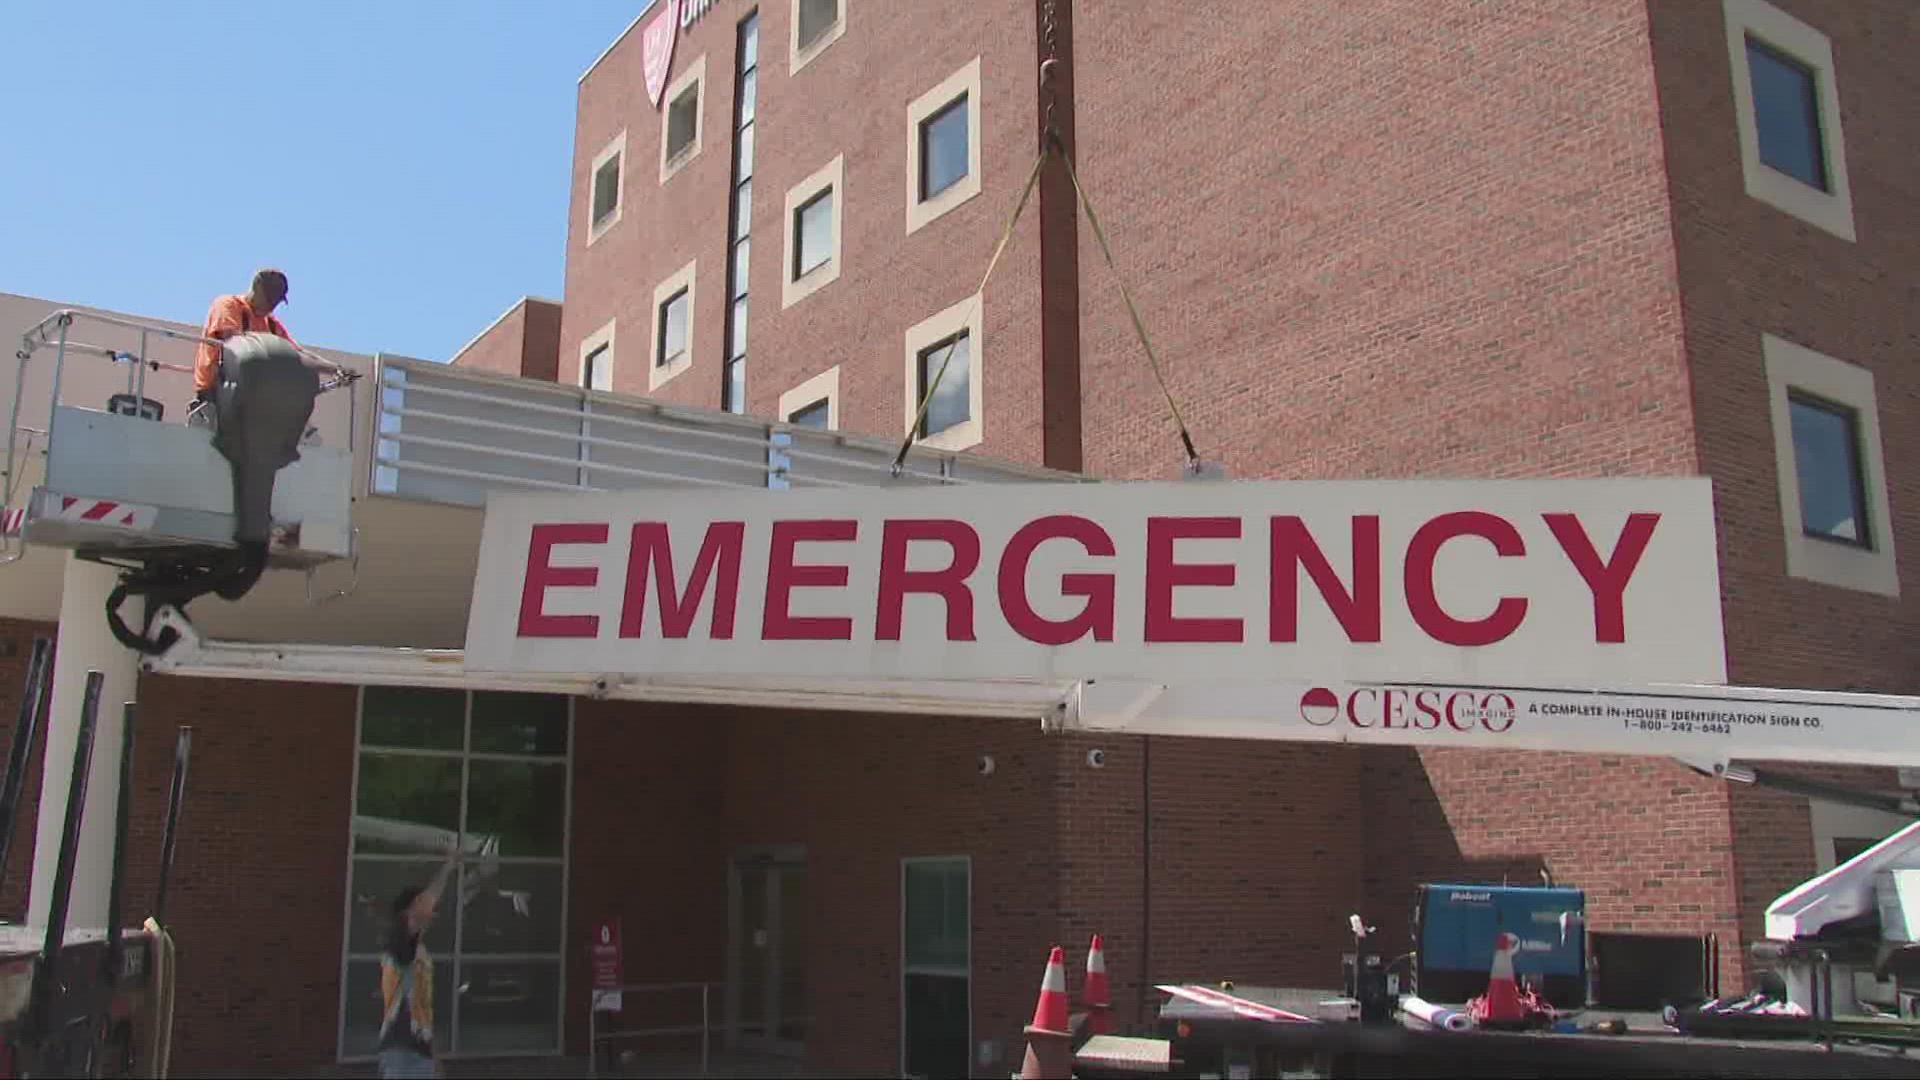 The City of Bedford has filed a lawsuit to reopen its now-closed University Hospitals medical centers. 3News Health Correspondent Monica Robins reports.